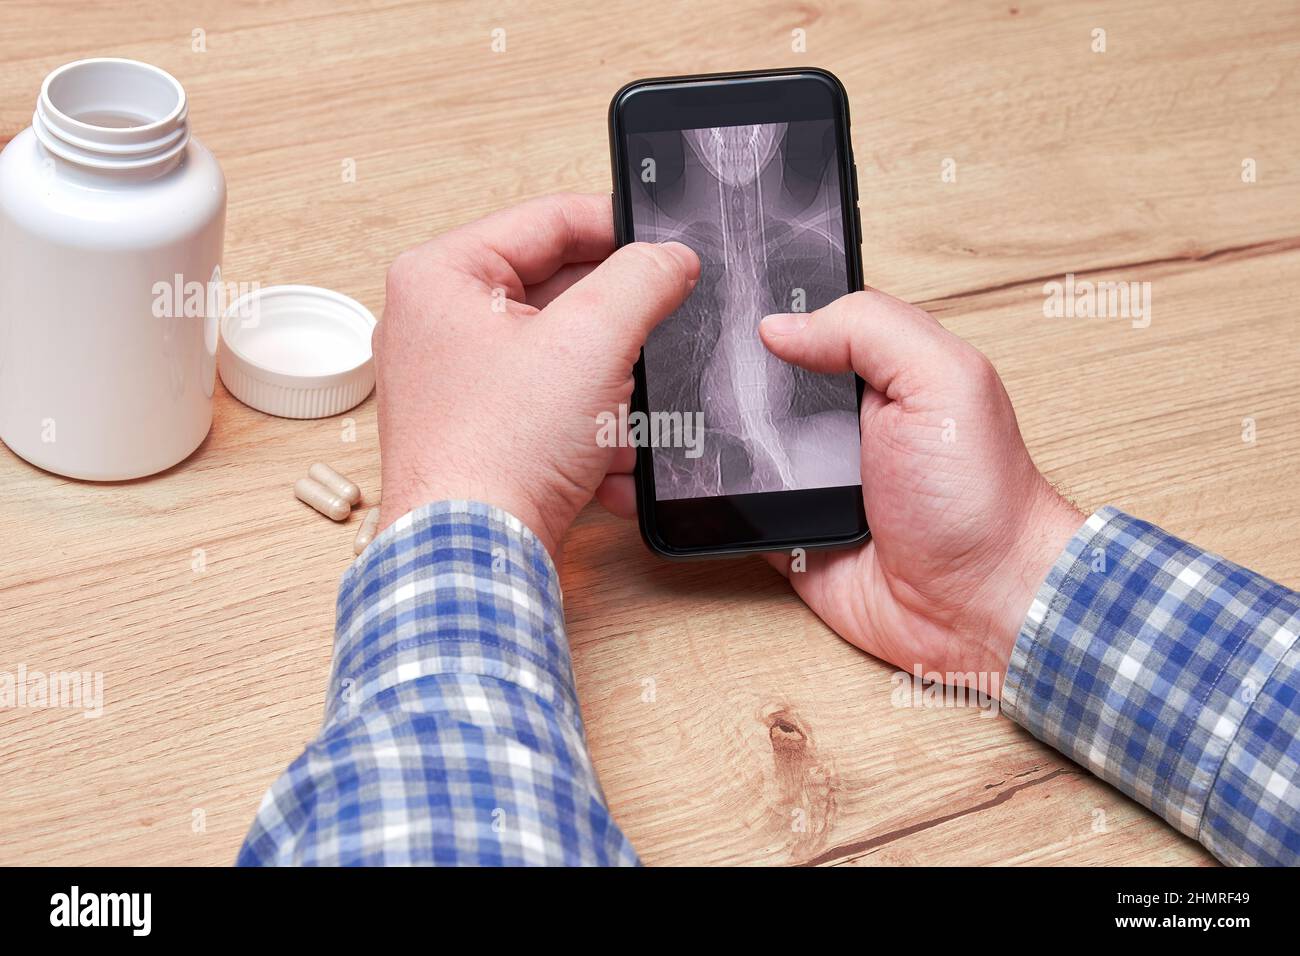 An old sick man checking a CT scan of his lungs on the cell phone screen. Pneumonia and disease diagnosis. Pills and medical bottles Stock Photo